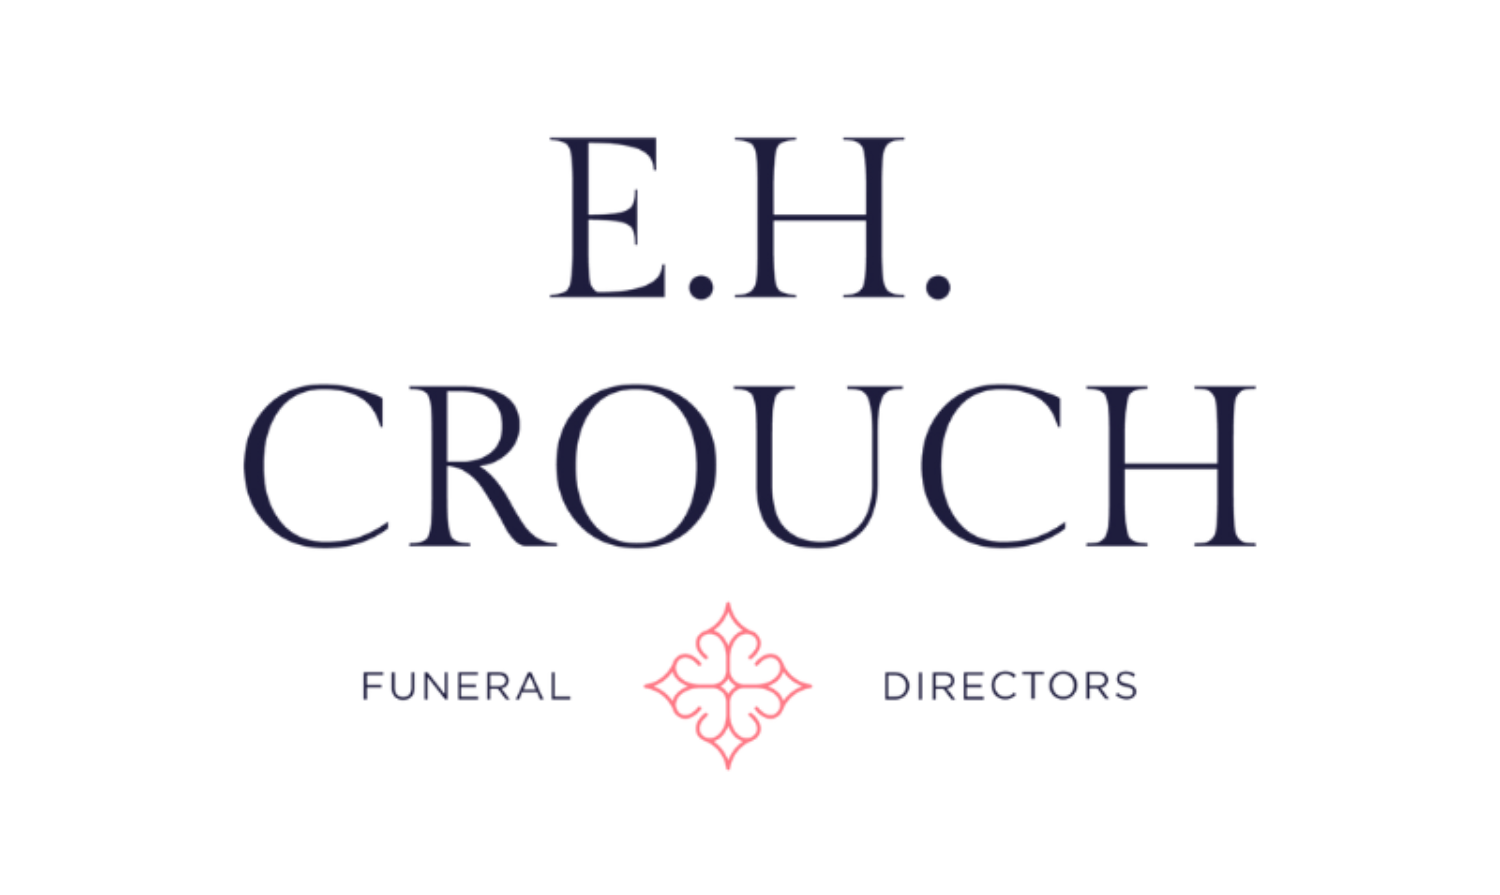 connect-corporate-networking-member-logo-eh-crouch